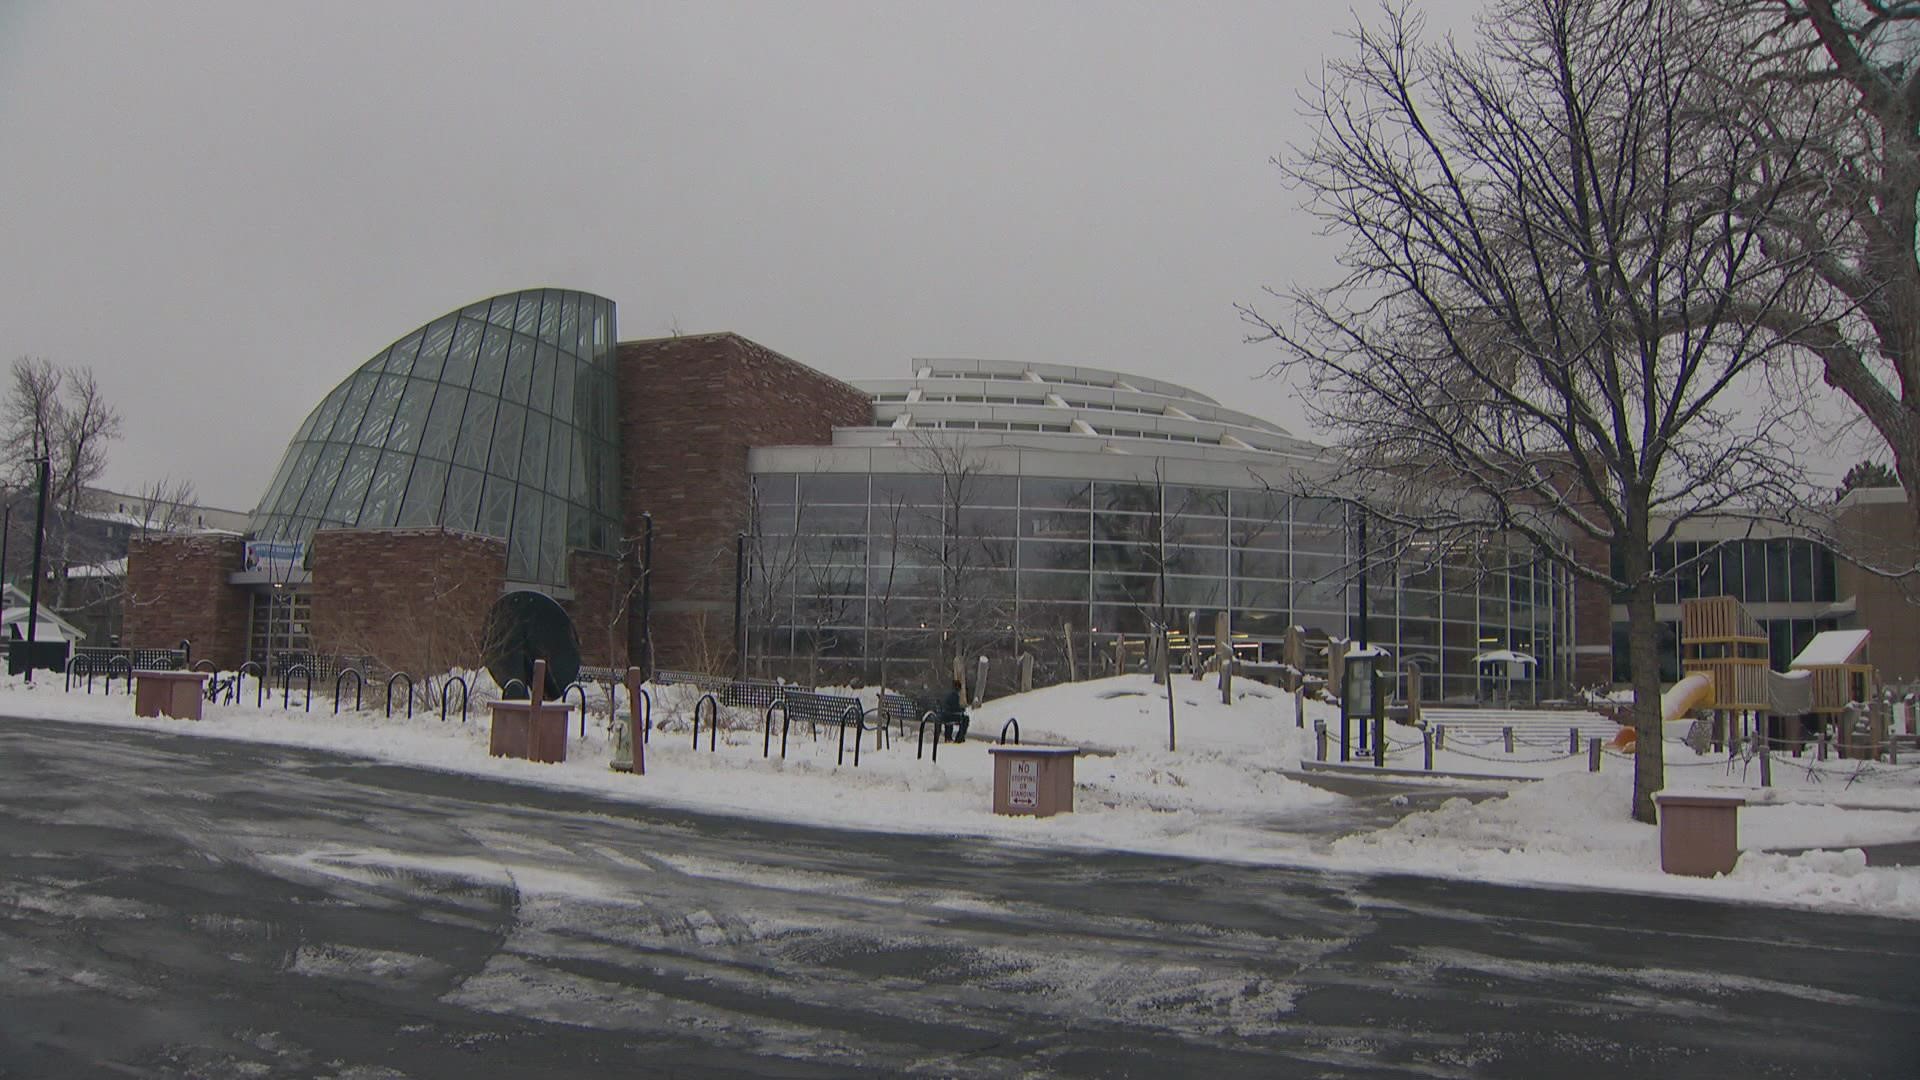 The City of Boulder is planning to reopen the main library after a temporary closure due to environmental testing showing methamphetamine use in the bathrooms.